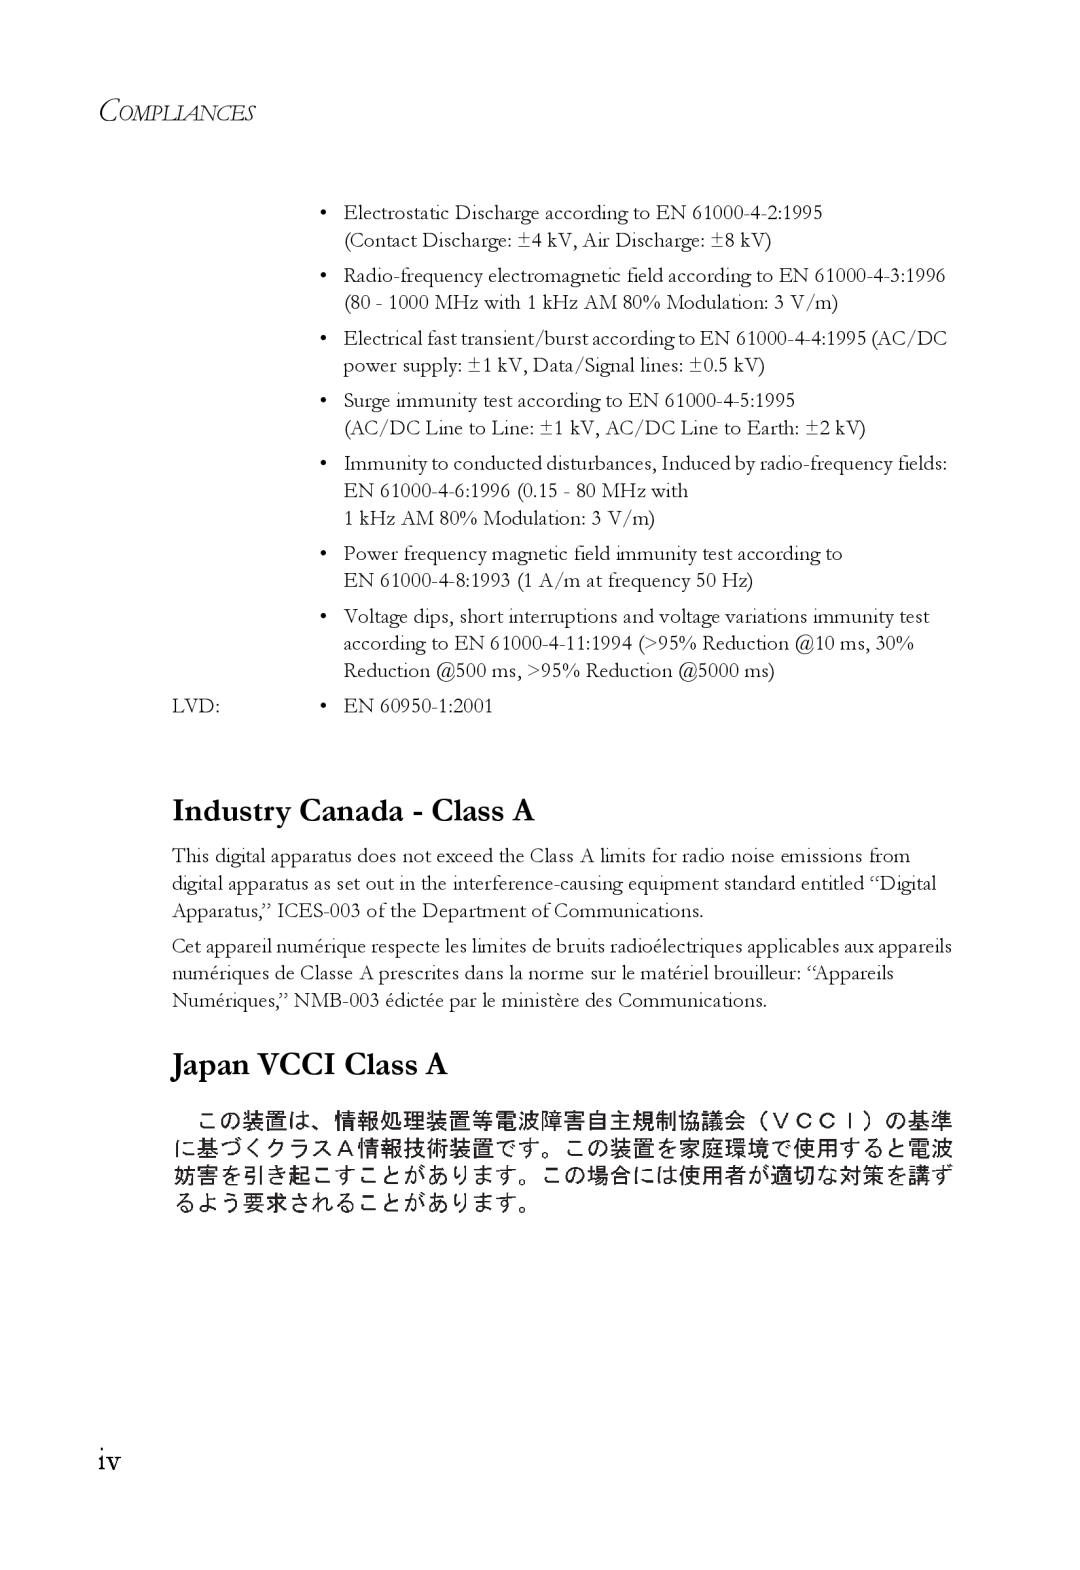 SMC Networks SMCGS24 manual Industry Canada - Class A, Japan VCCI Class A, Compliances 